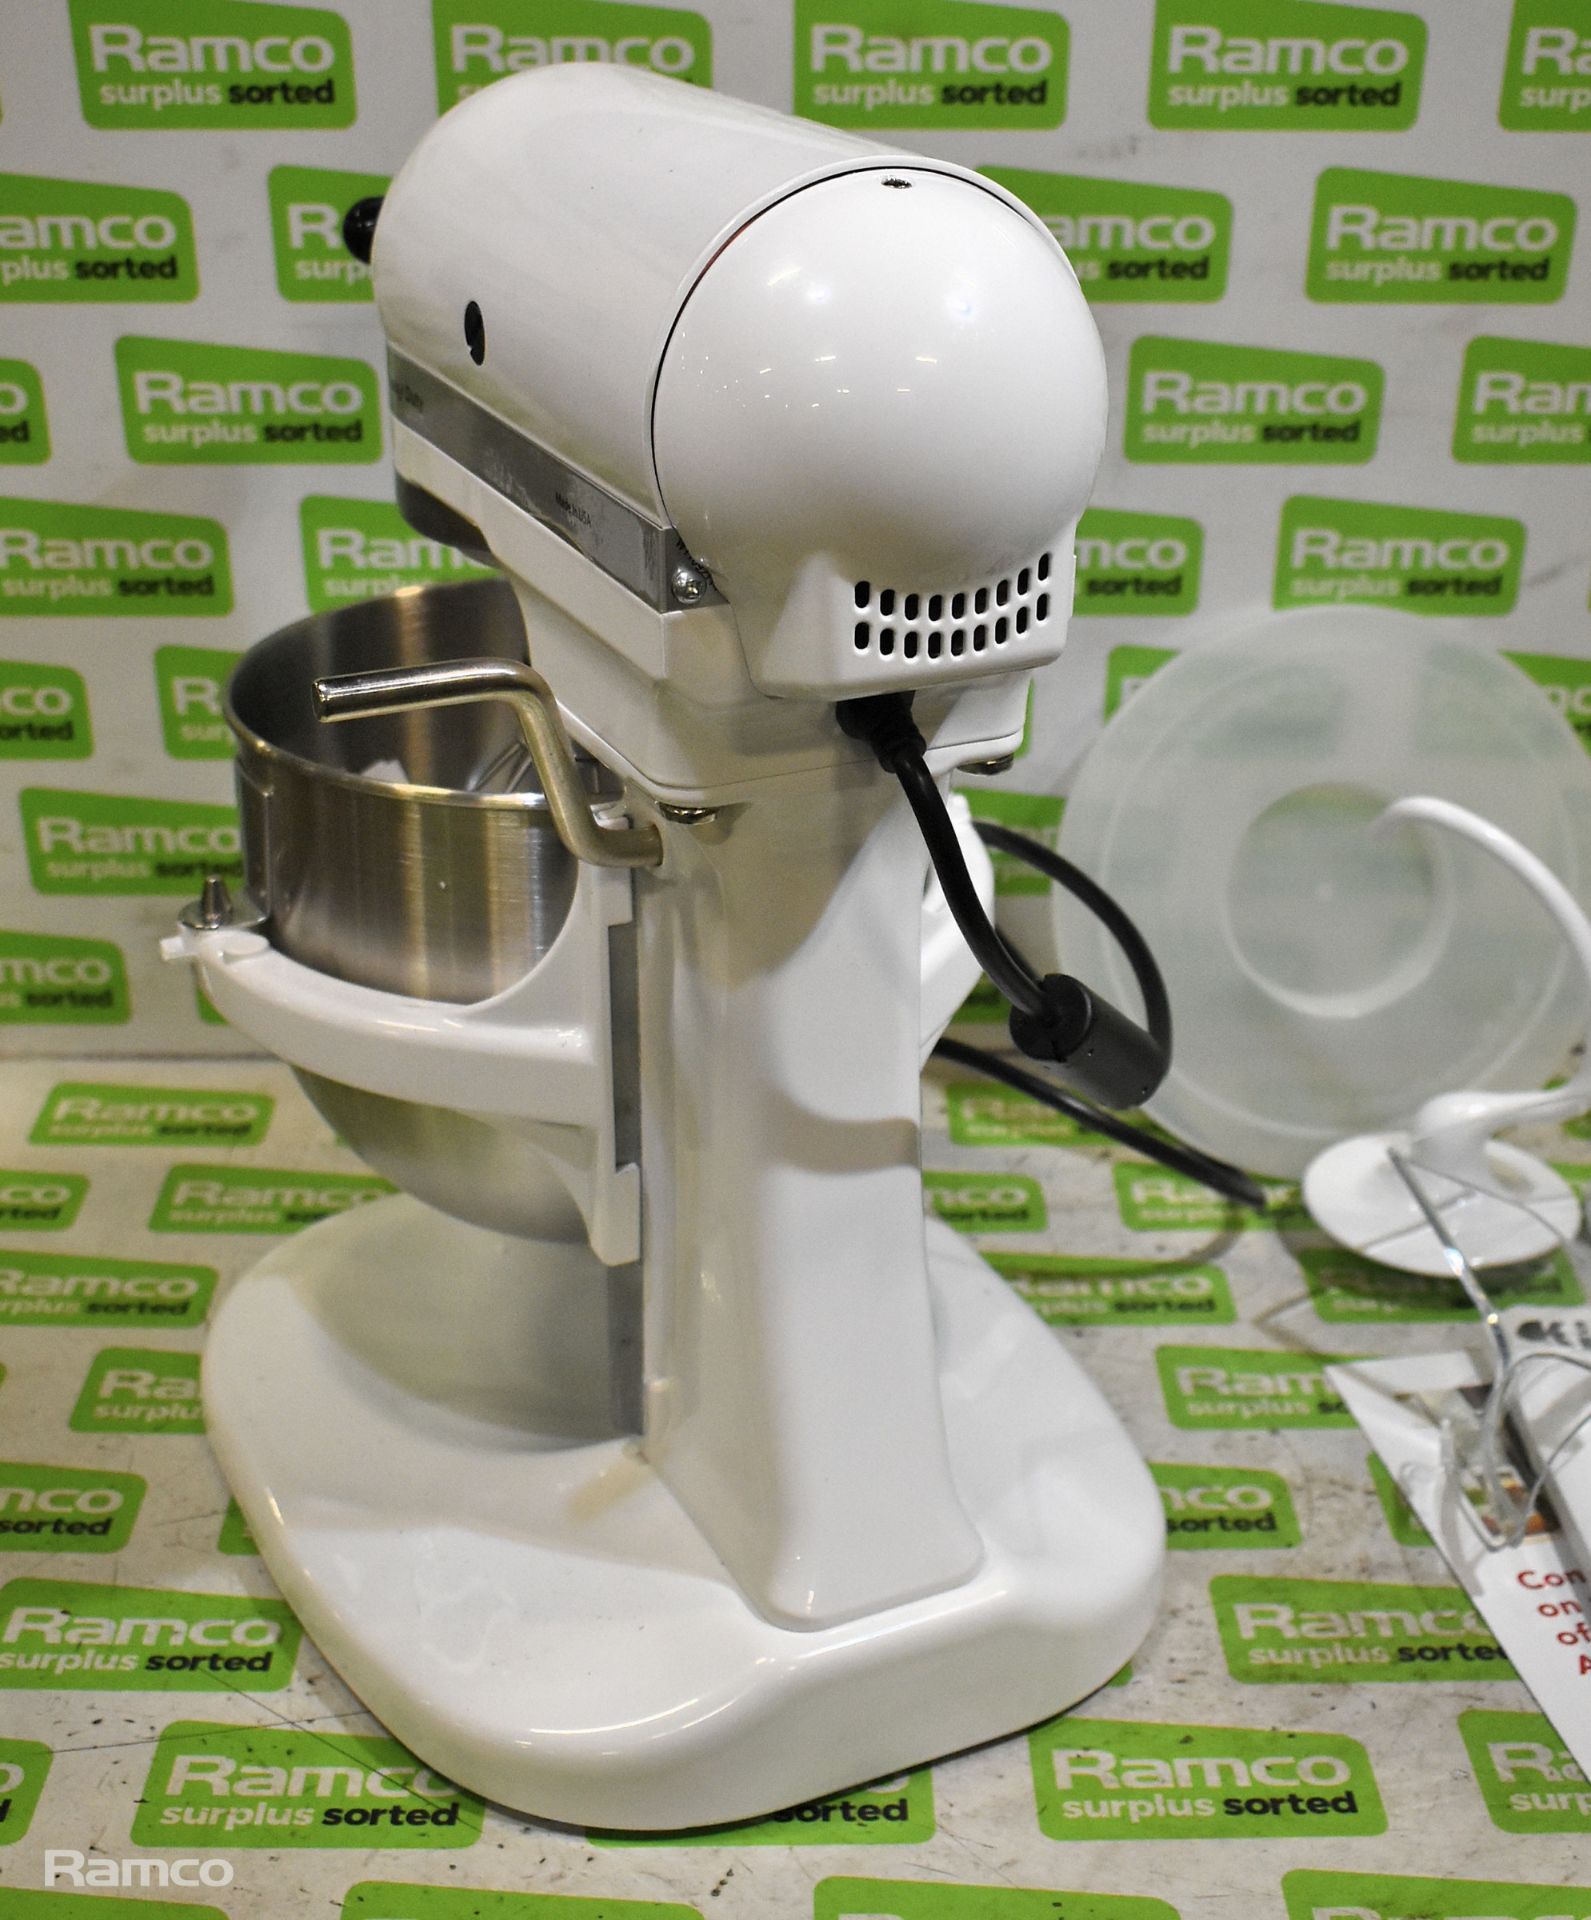 KitchenAid 5KPM5BWH electric stand mixer with accessories 240V - Image 5 of 9